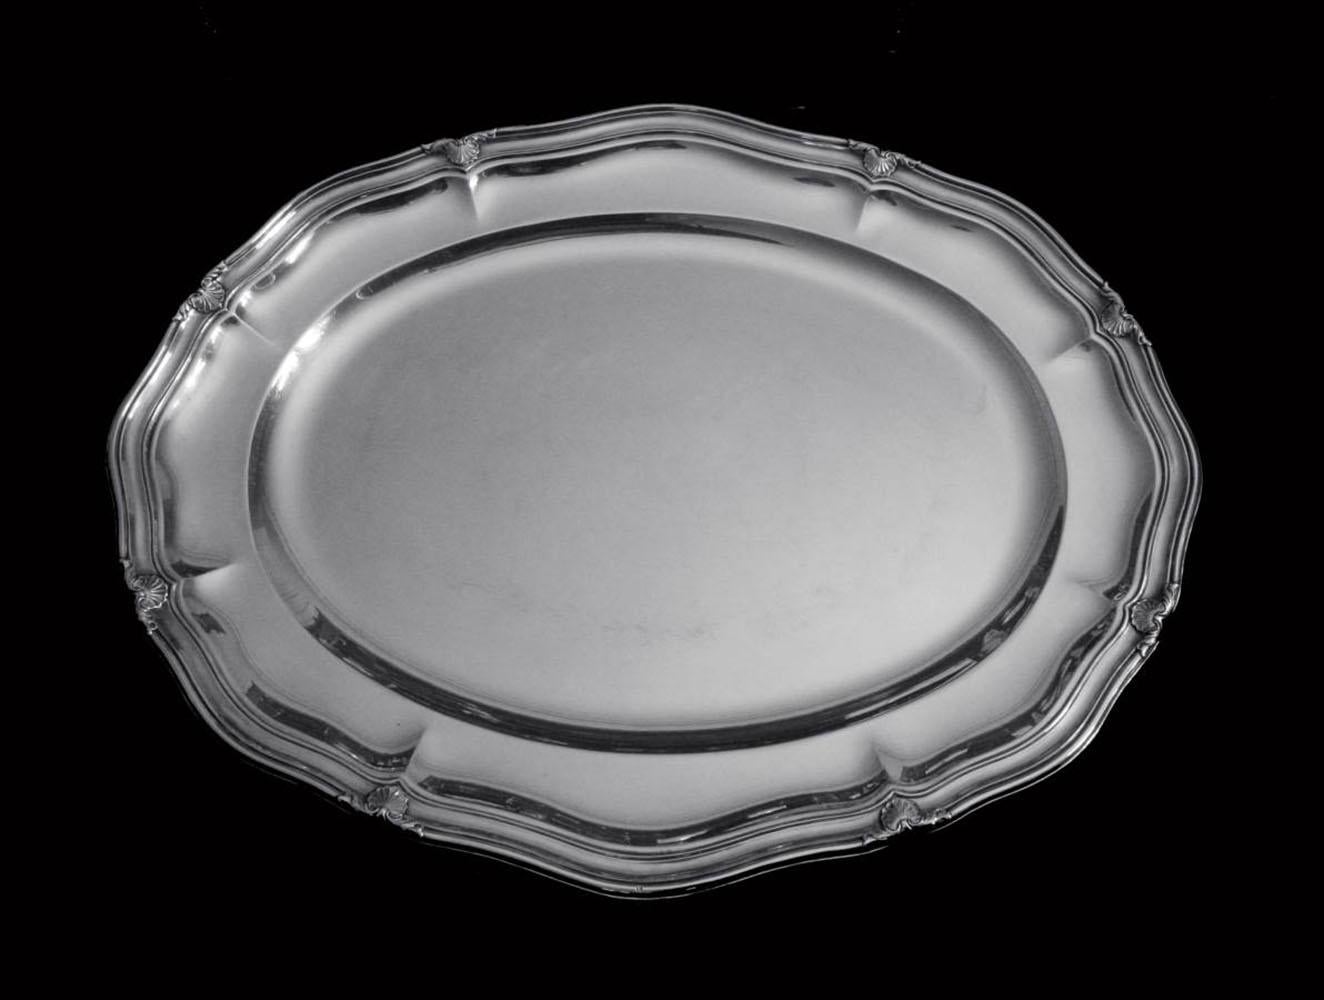 Direct from a Private Chateau near Paris, A Magnificent 10pc Set of 19th Century 950 Sterling Silver Louis XVI Serving Platters by the World's Premier French Silversmith Jean-Baptiste Odiot, An Ultra Luxurious Addition to any Stately Home and